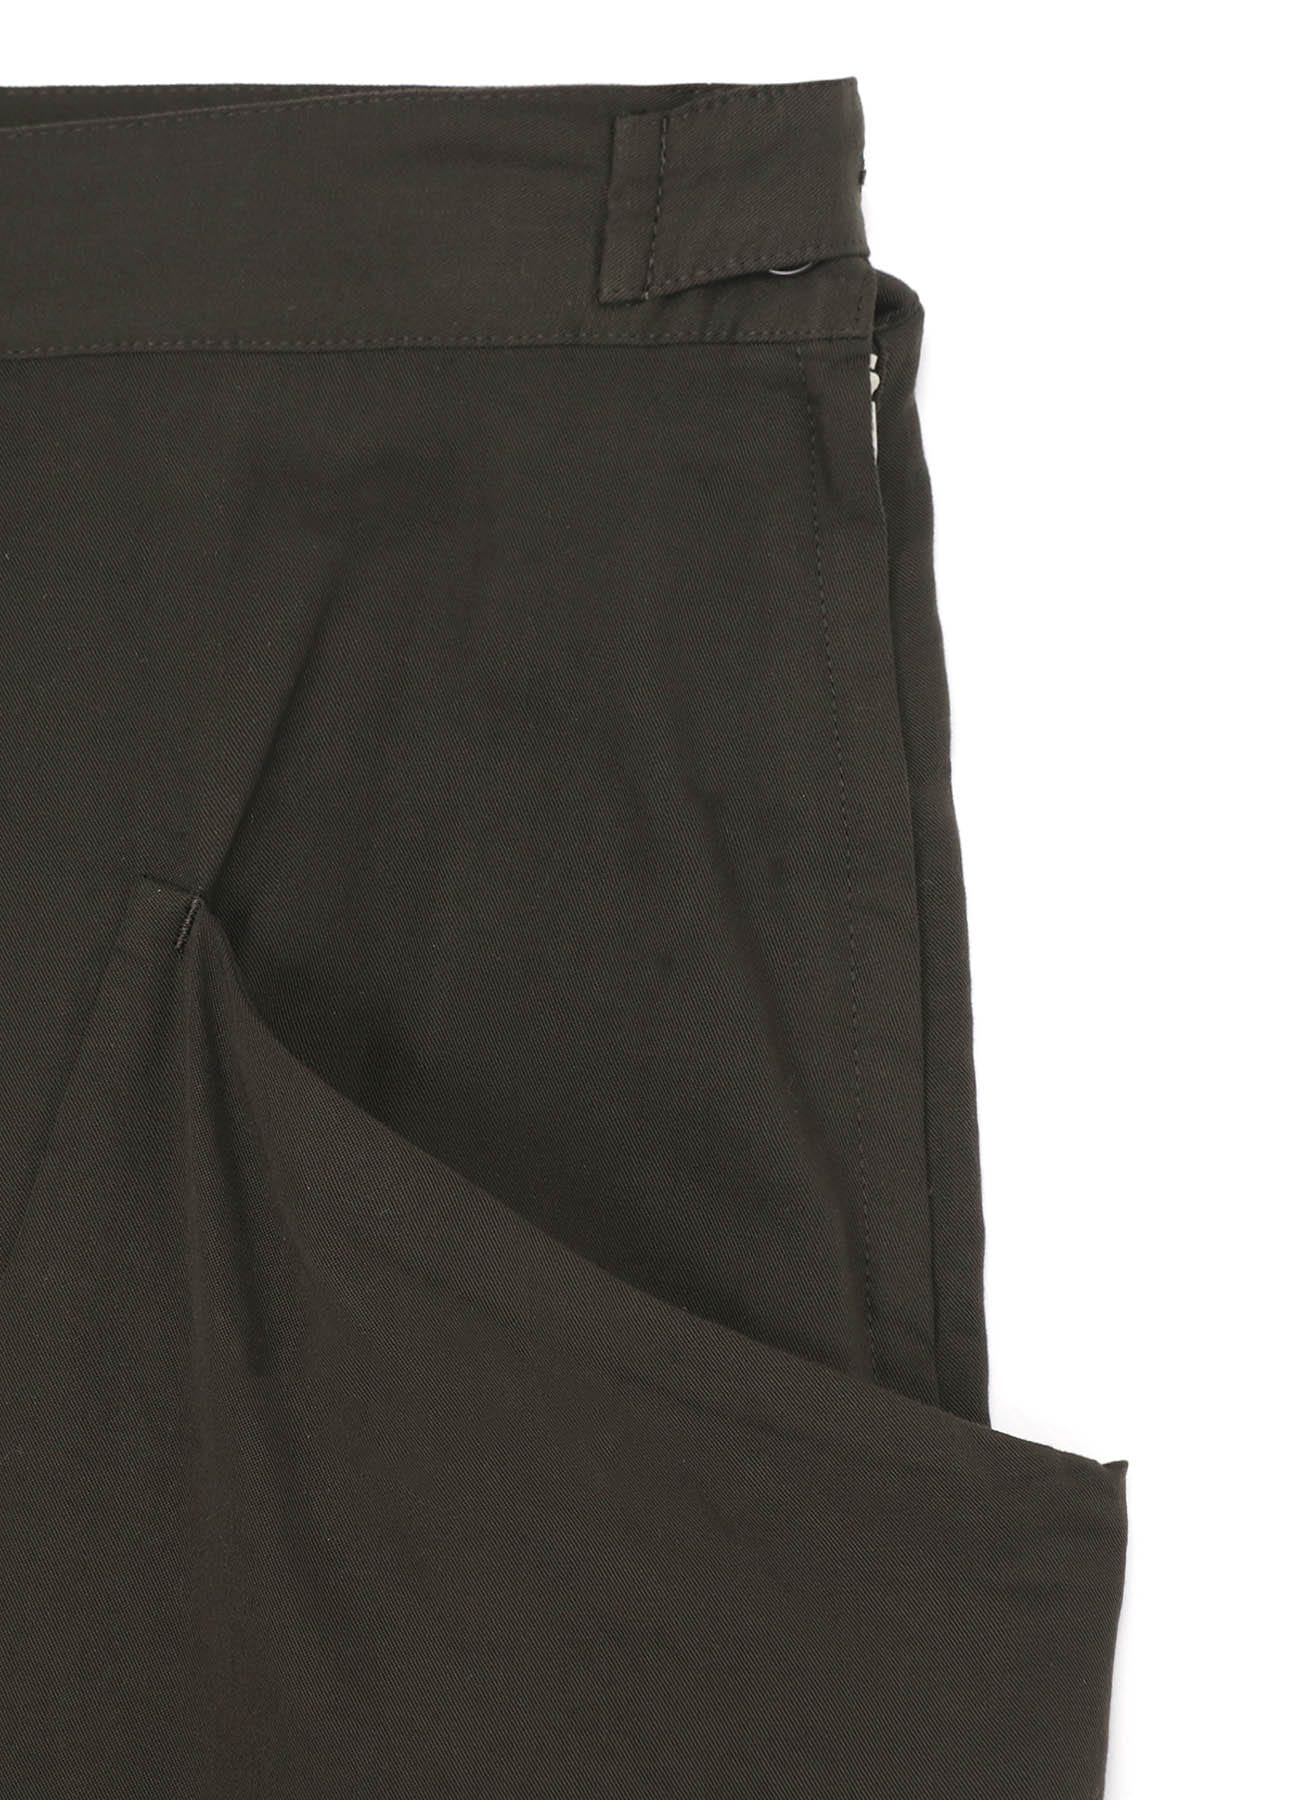 CELLULOSE TWILL GARMENT-DYED LONG POCKET SKIRT